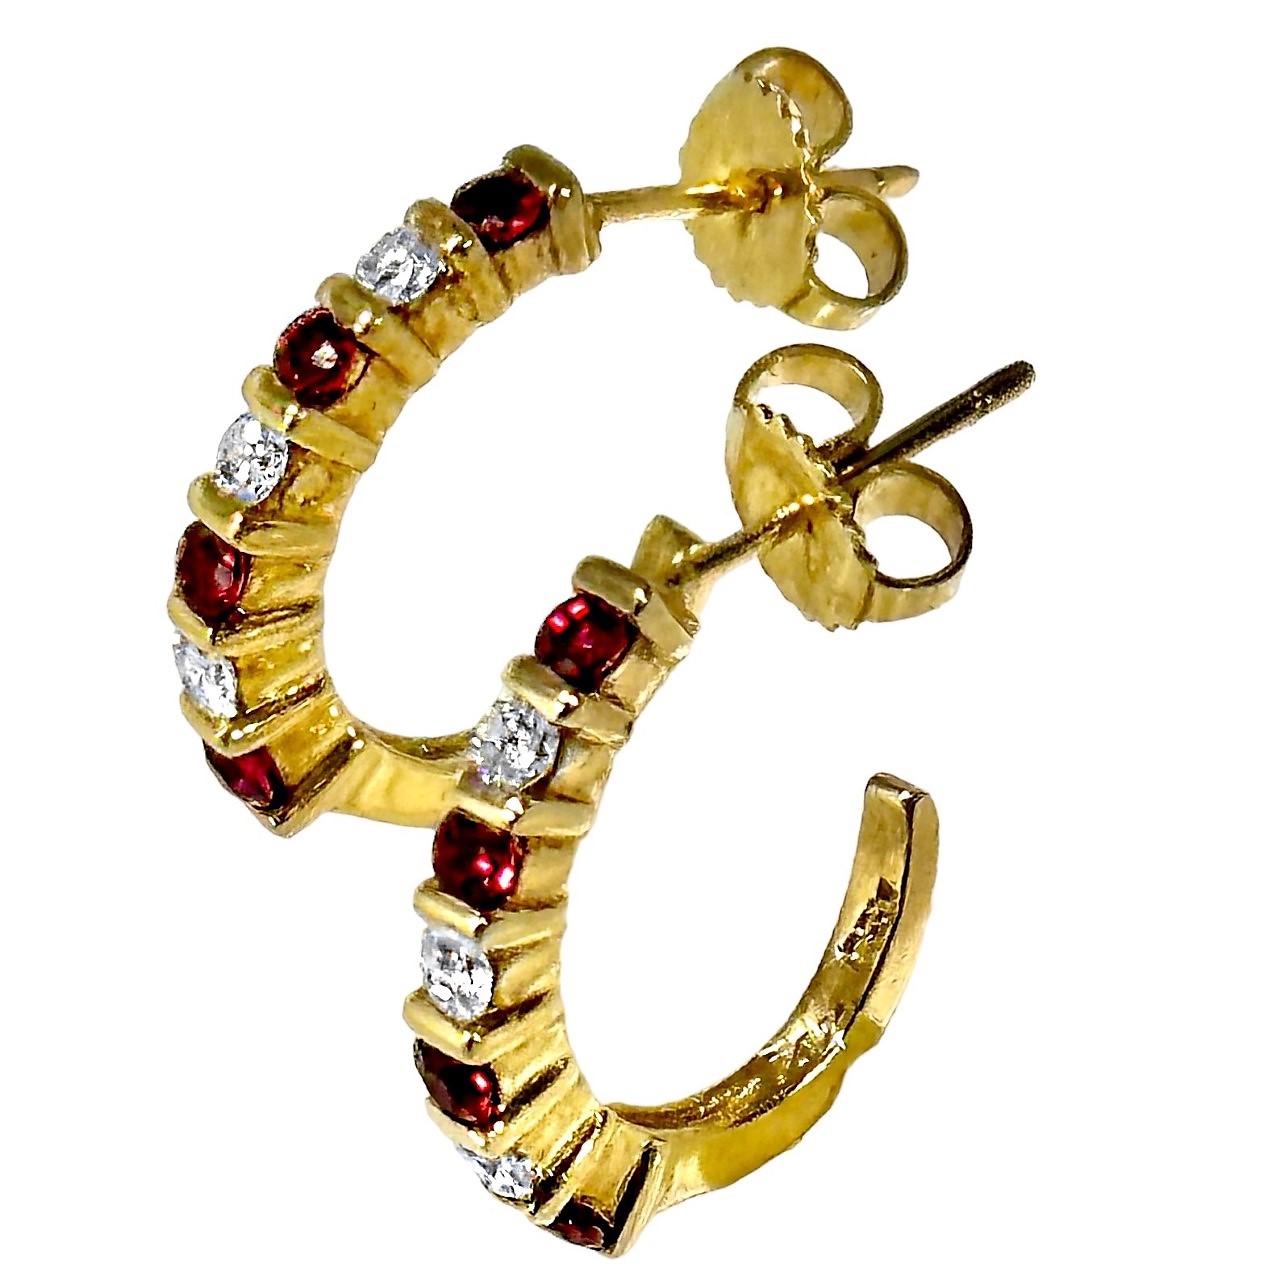 This lovely, and somewhat demure pair of 14k yellow gold hoop earrings are set with eight vibrant, rich red rubies and with six brilliant cut diamonds. Total approximate ruby weight is .45ct and total approximate diamond weight is .40ct. Overall